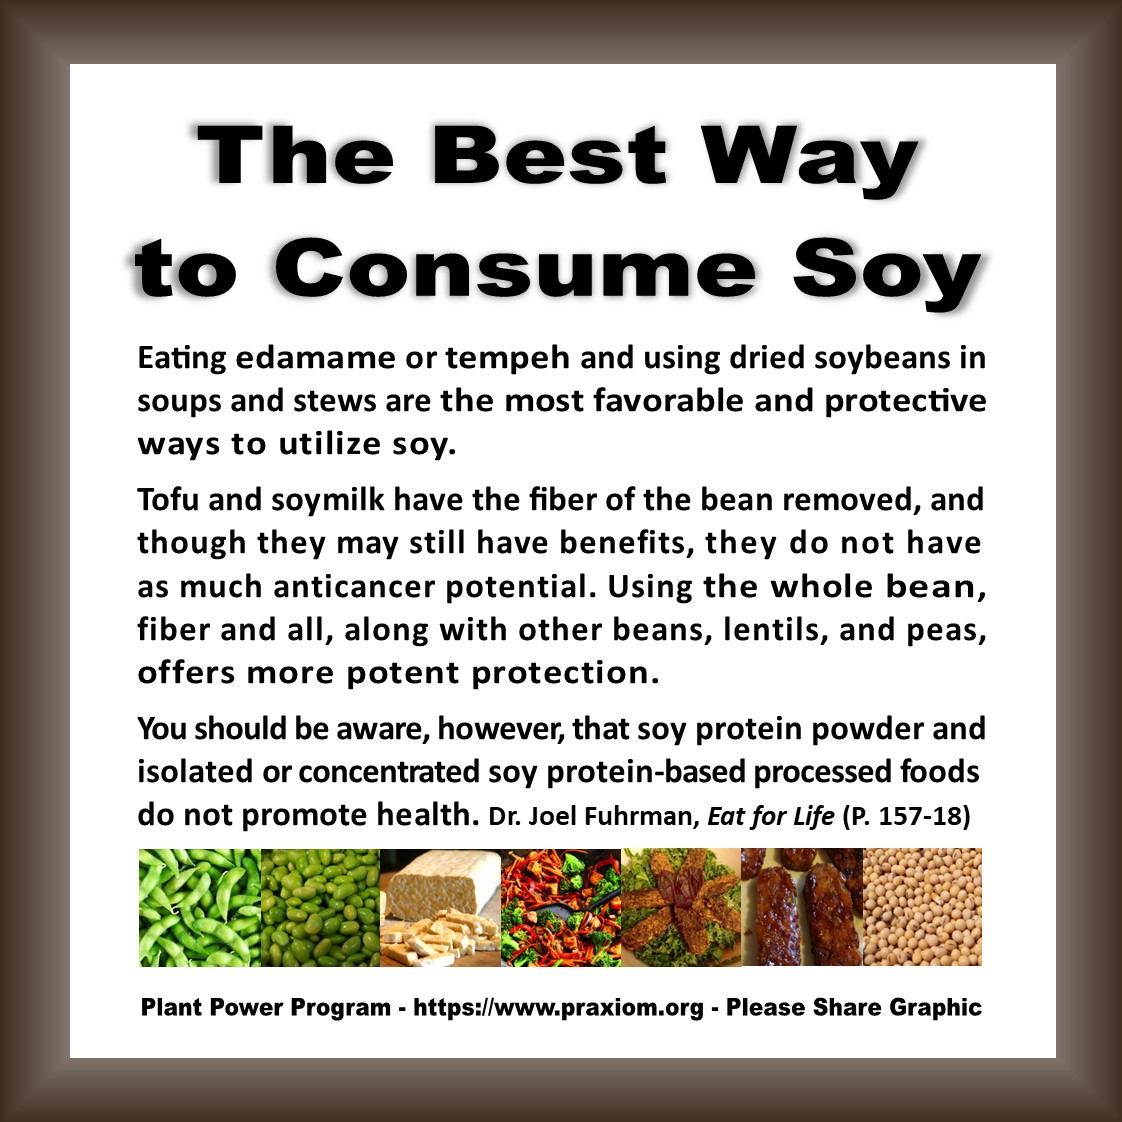 The Best Way to Use Soy - Dr. Joel Fuhrman